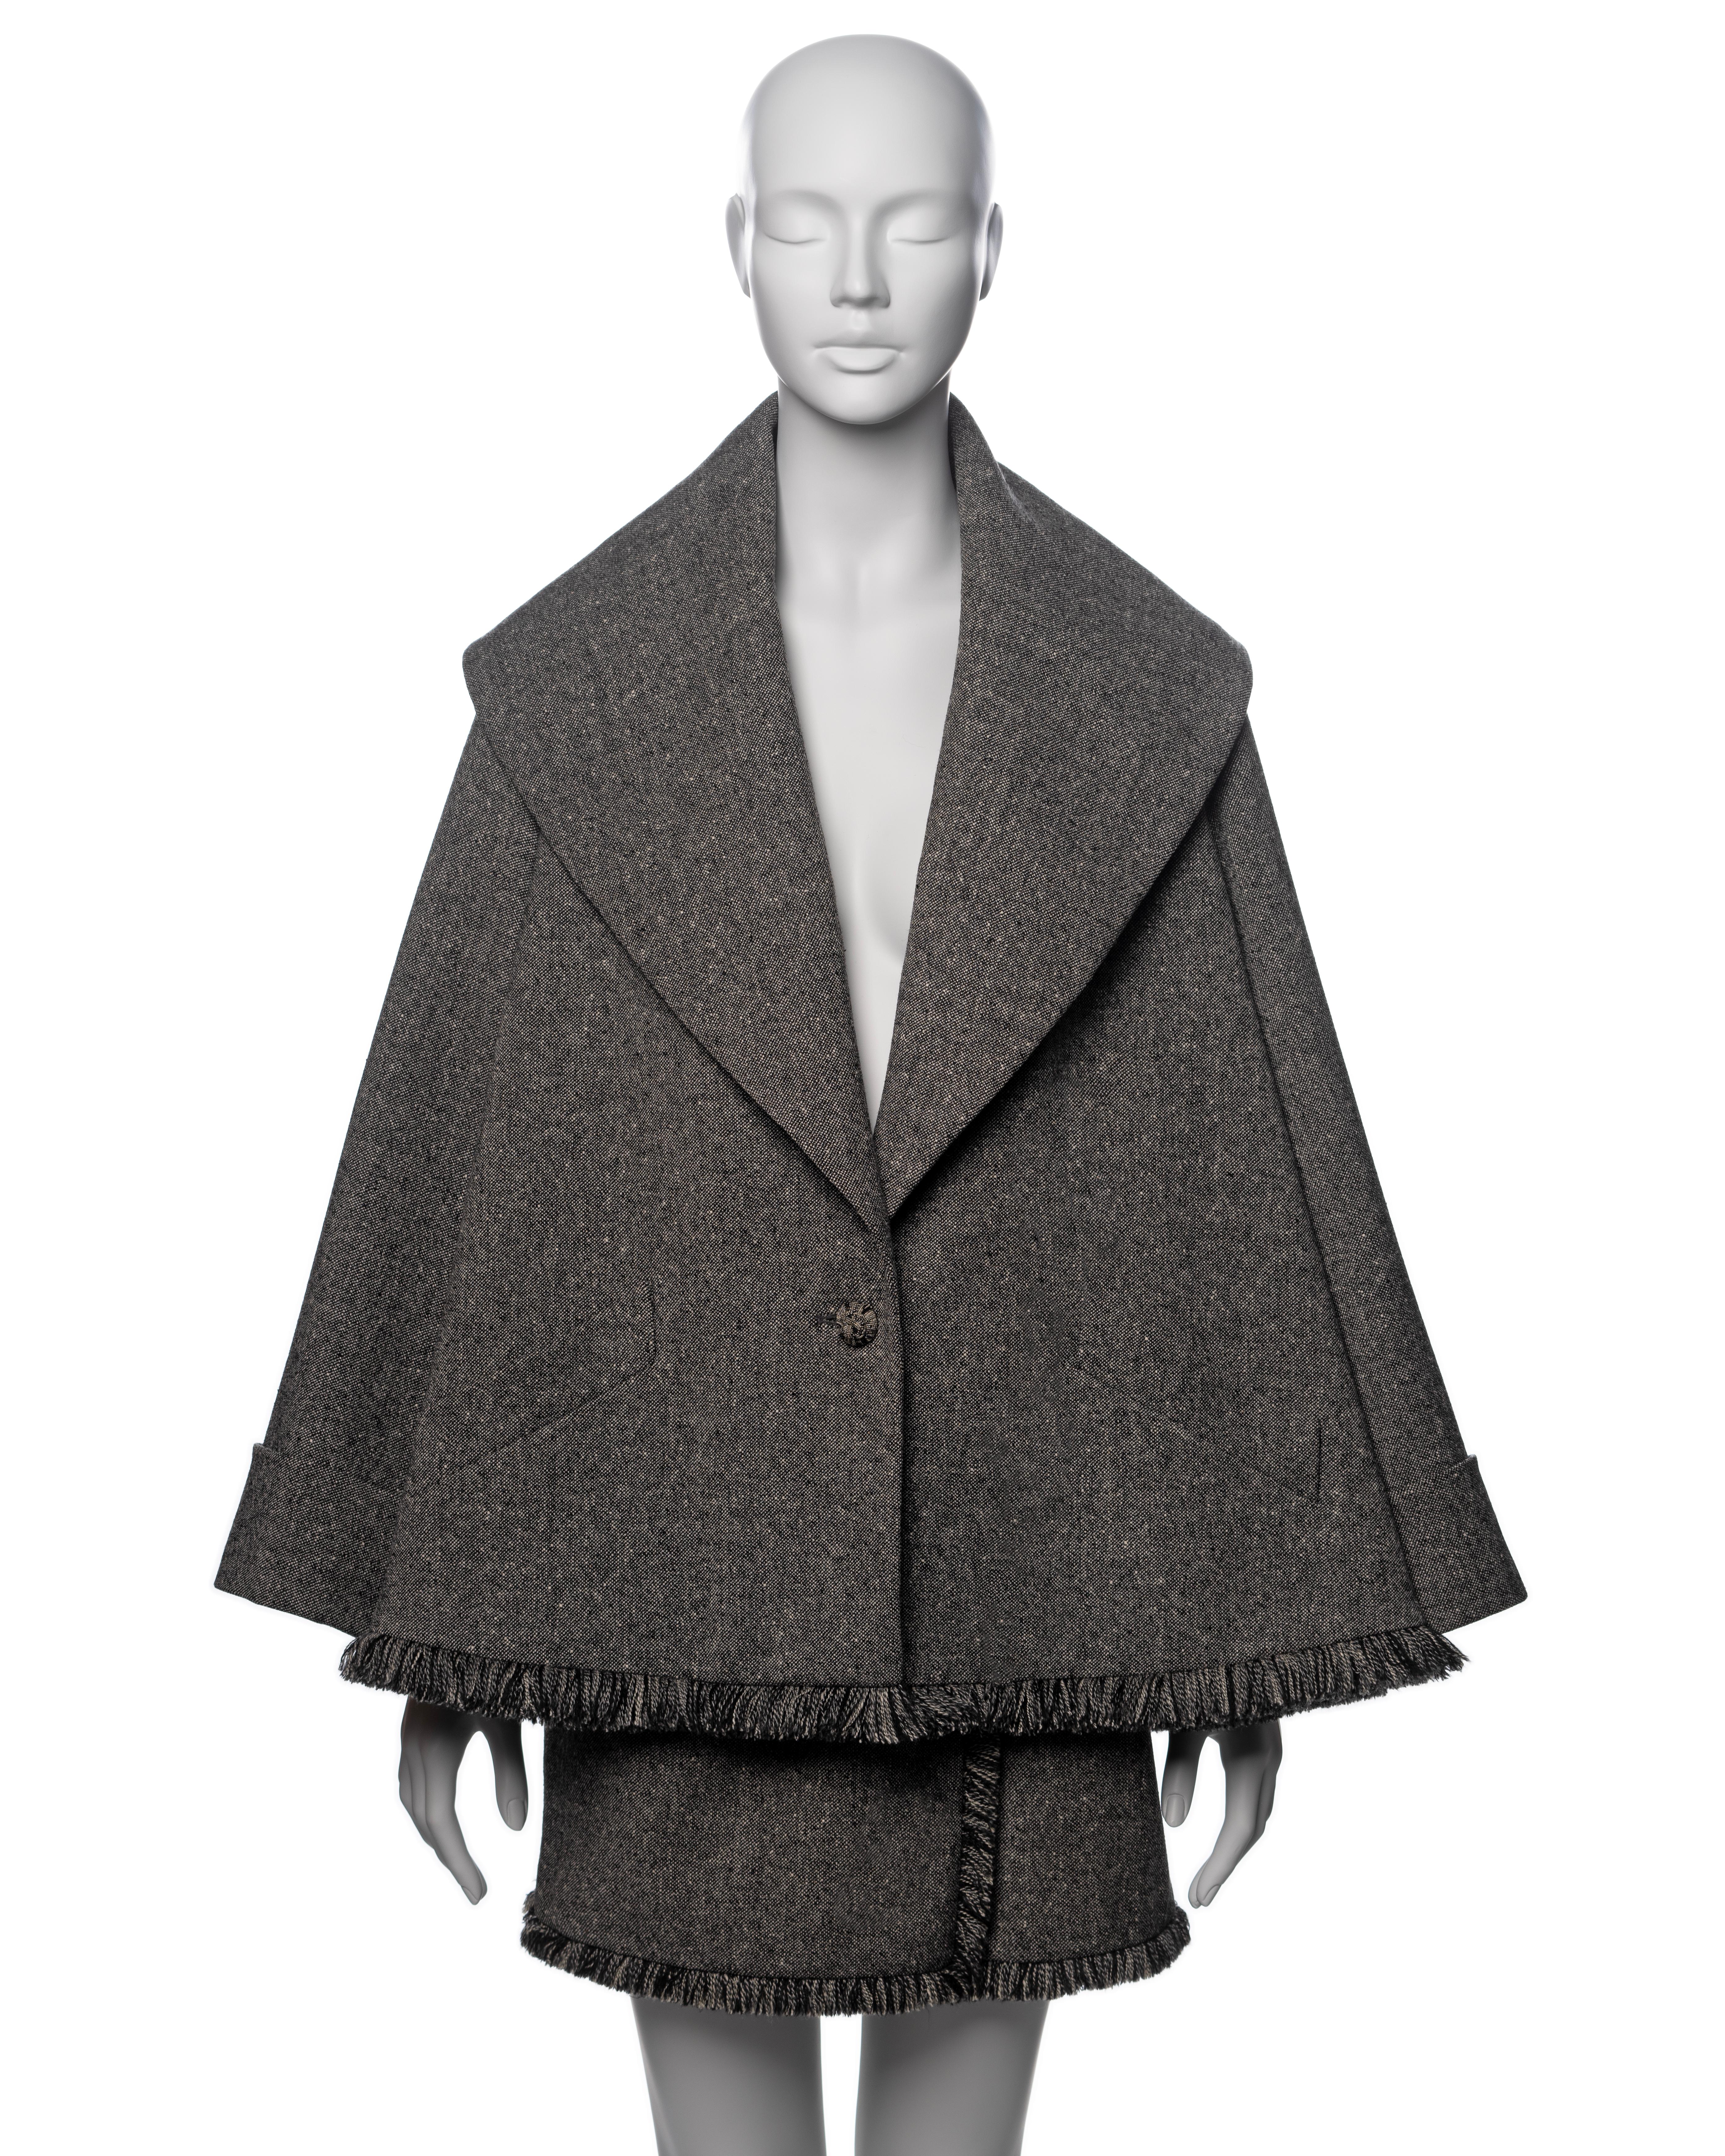 Christian Dior by John Galliano Grey Tweed Jacket and Mini Skirt Suit, FW 1998 In Excellent Condition For Sale In London, GB